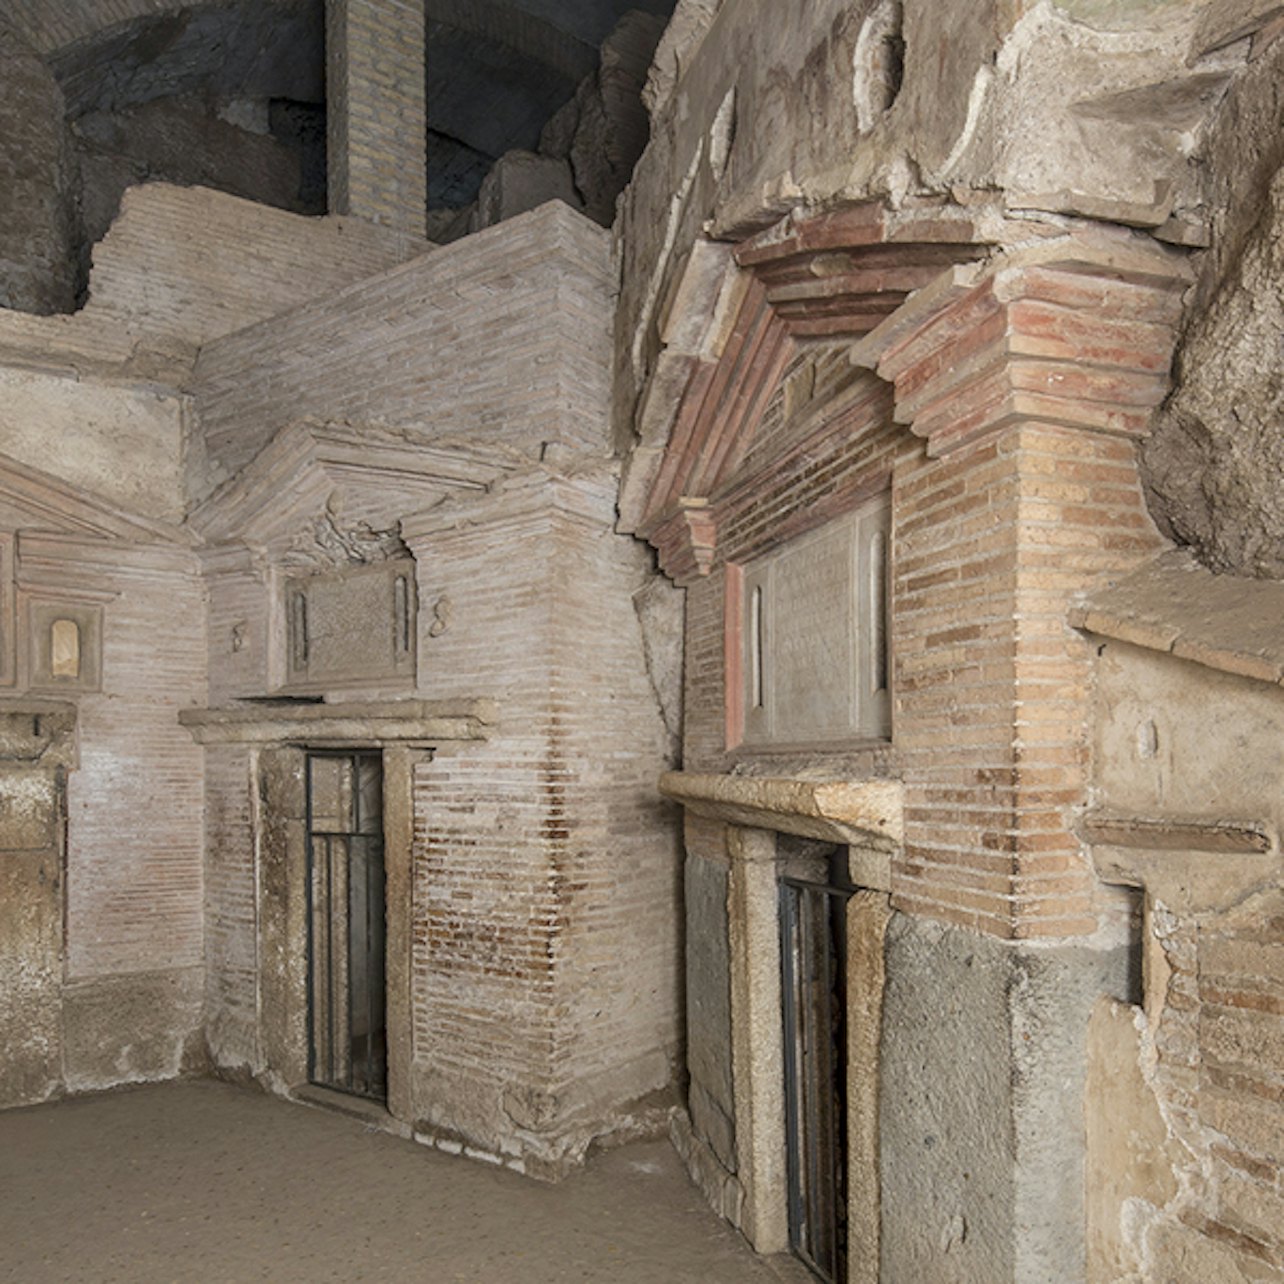 The Catacombs of San Sebastiano: Guided Tour - Accommodations in Rome